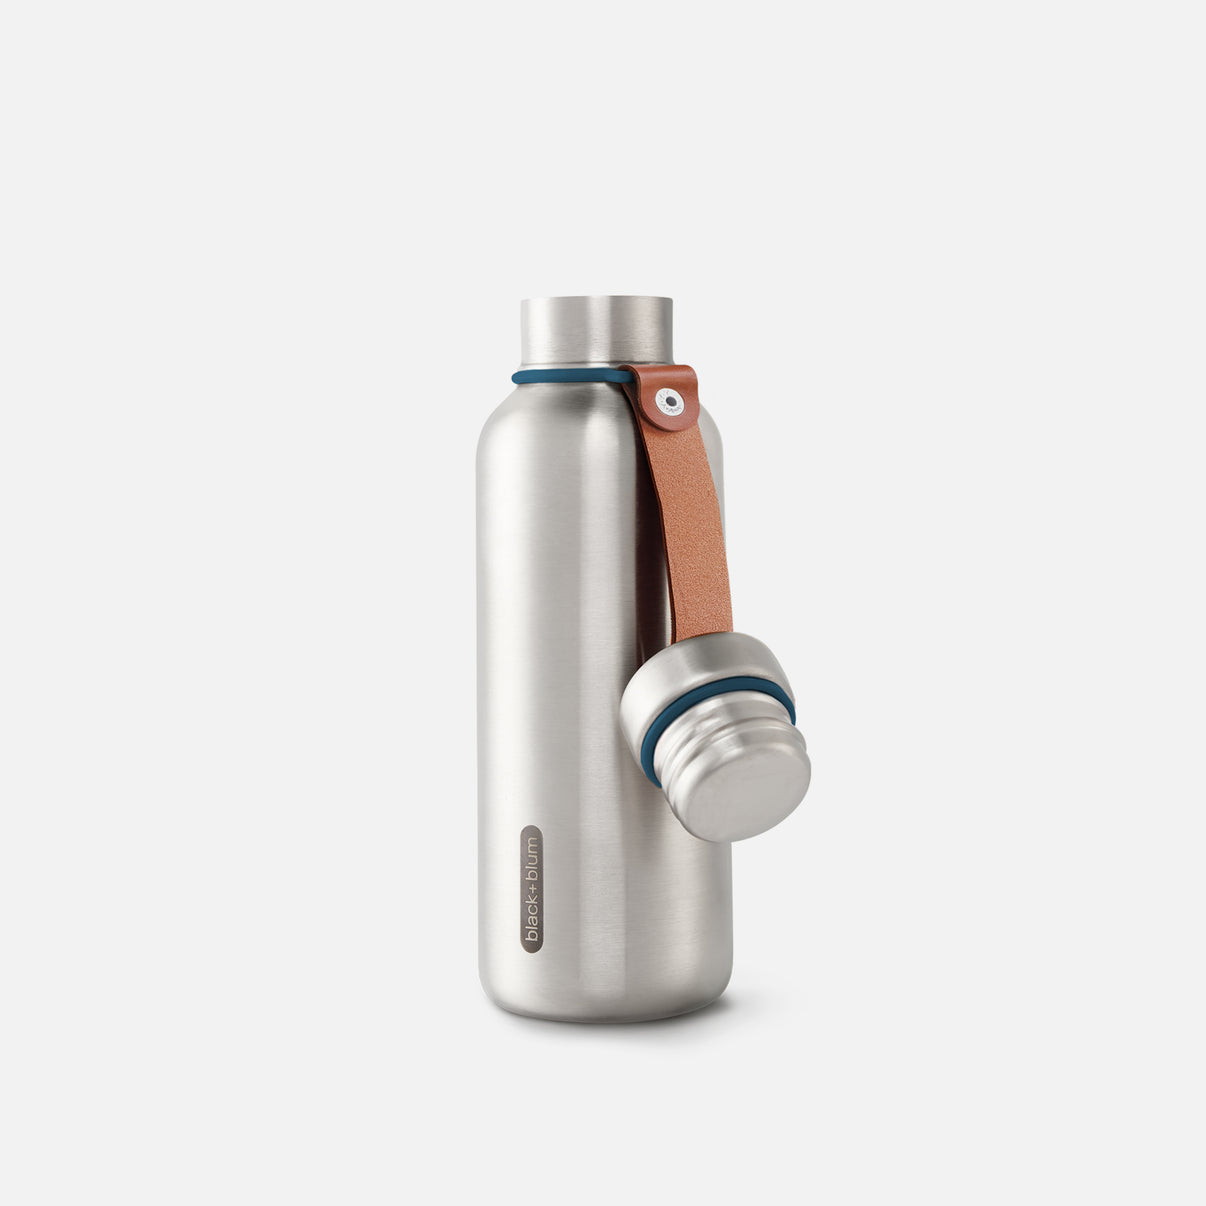 A black water bottle vacuum insulated stainless steel leak-proof